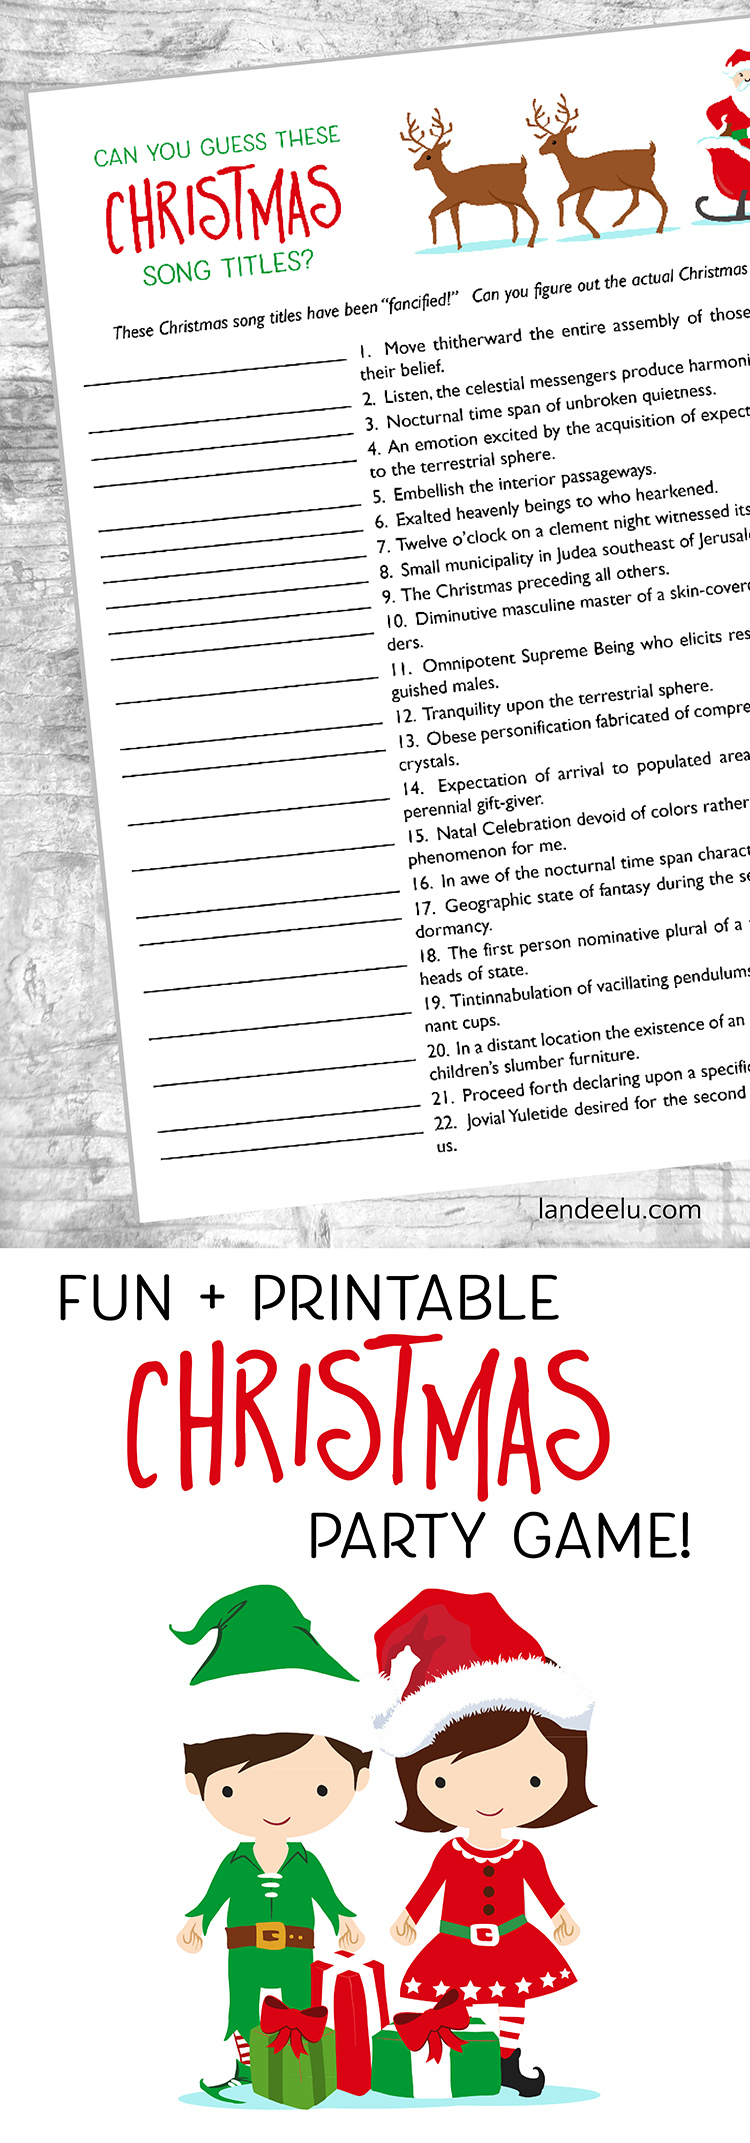 Christmas Games: Guess These Christmas Songs! - Landeelu - Free Printable Christmas Song Picture Game